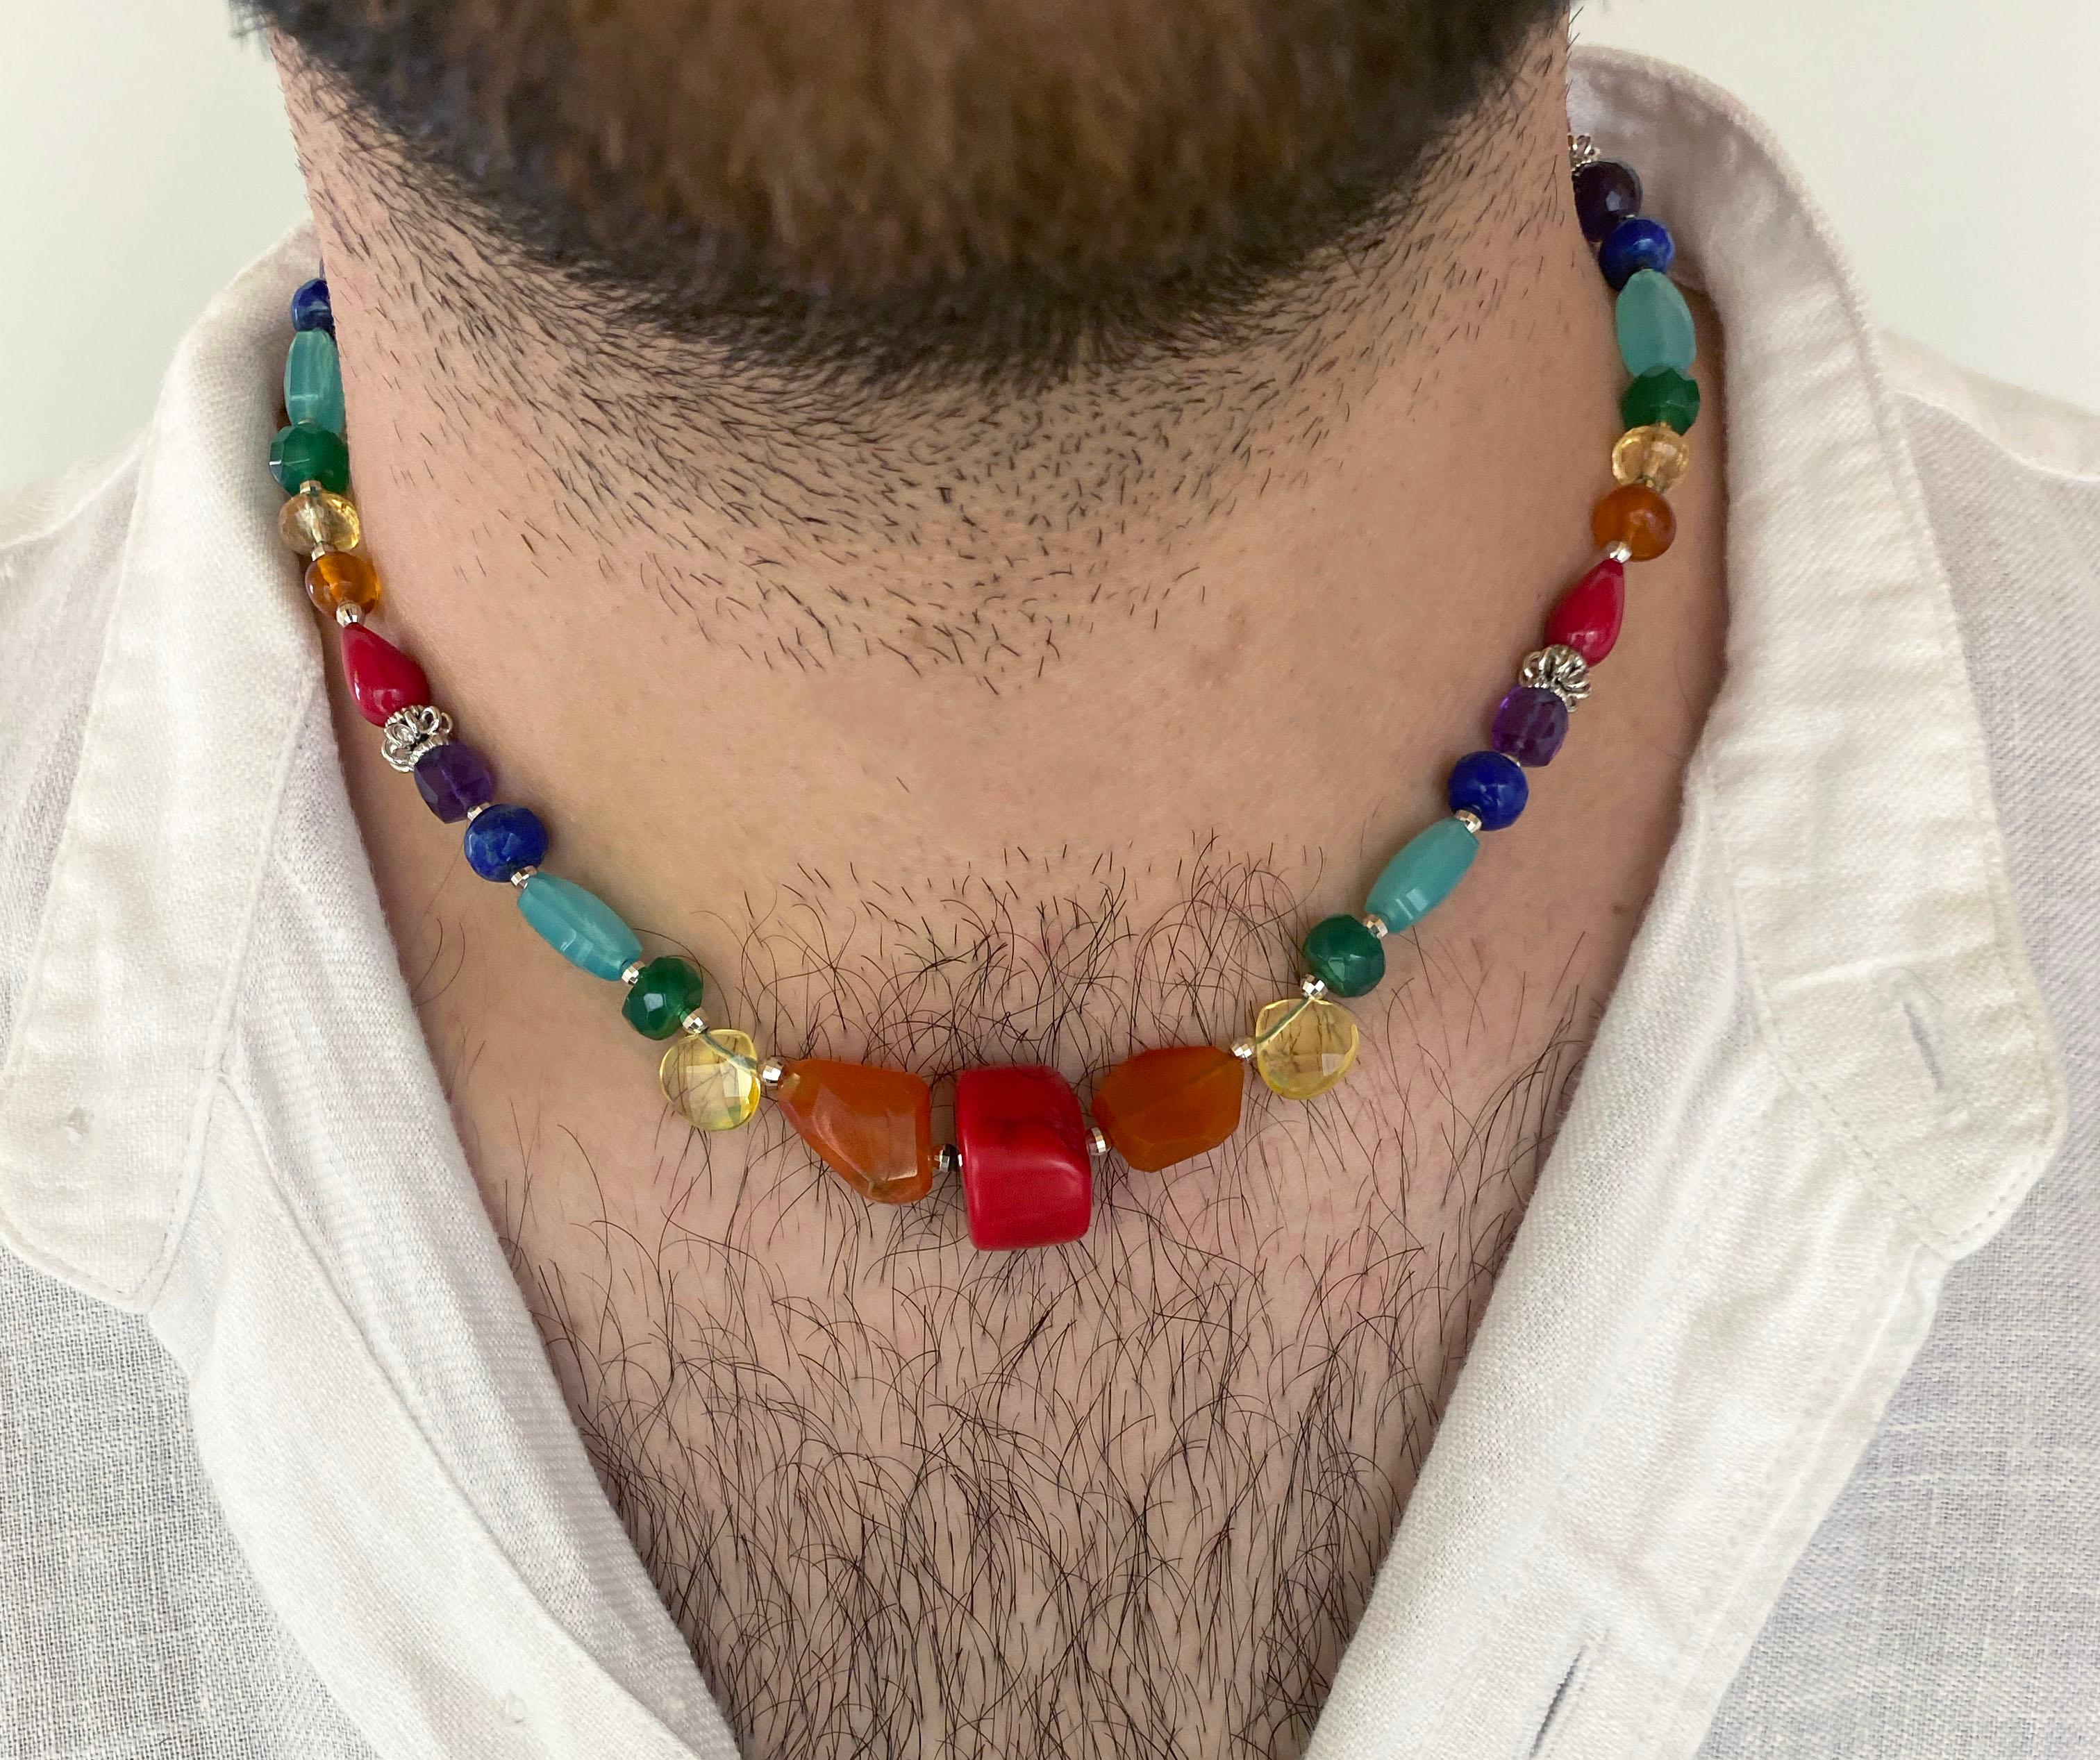 This Rainbow necklace represents a style acknowledging a diversity celebrating people of all shapes and colors, perfect to show  Pride solidarity .
Adorned with beautiful multi faceted and multi shaped Coral, Amber, Citrine, Green Onyx, Aquamarine,